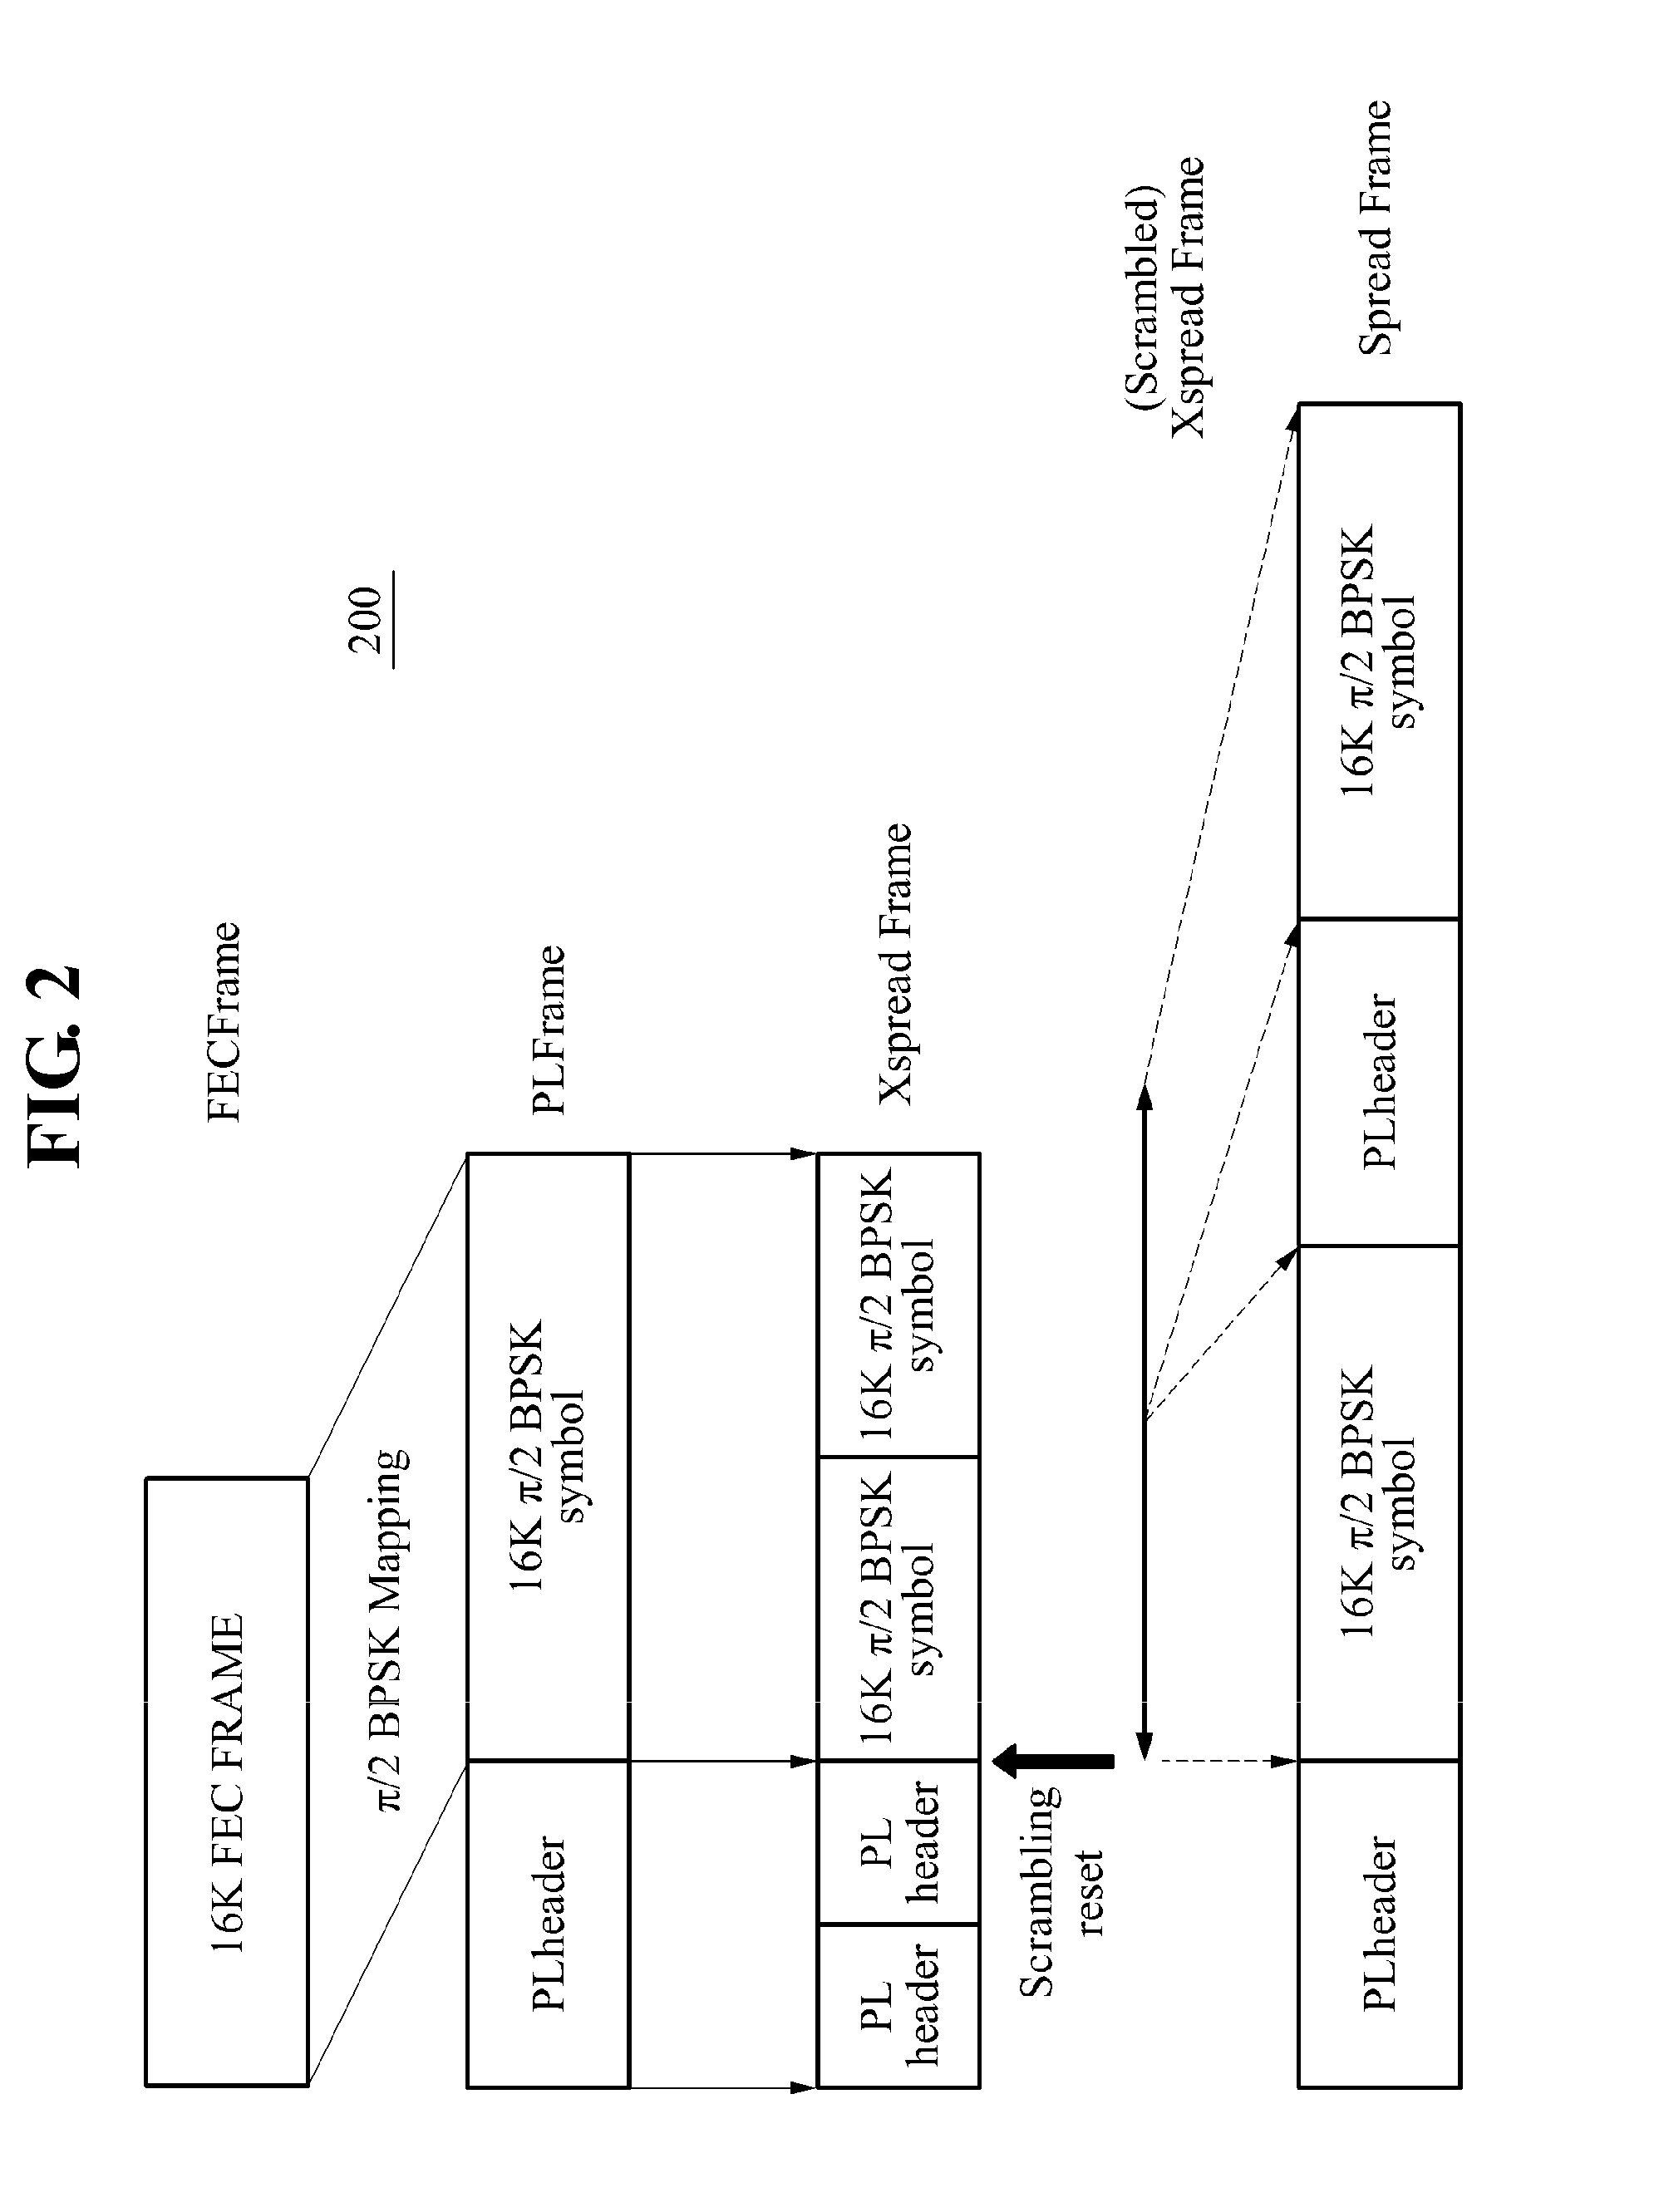 Digital video broadcasting - satellite - second generation (dvb-s2) based transmission and reception apparatus and method operable in circumstances of low signal to noise ratio (SNR)